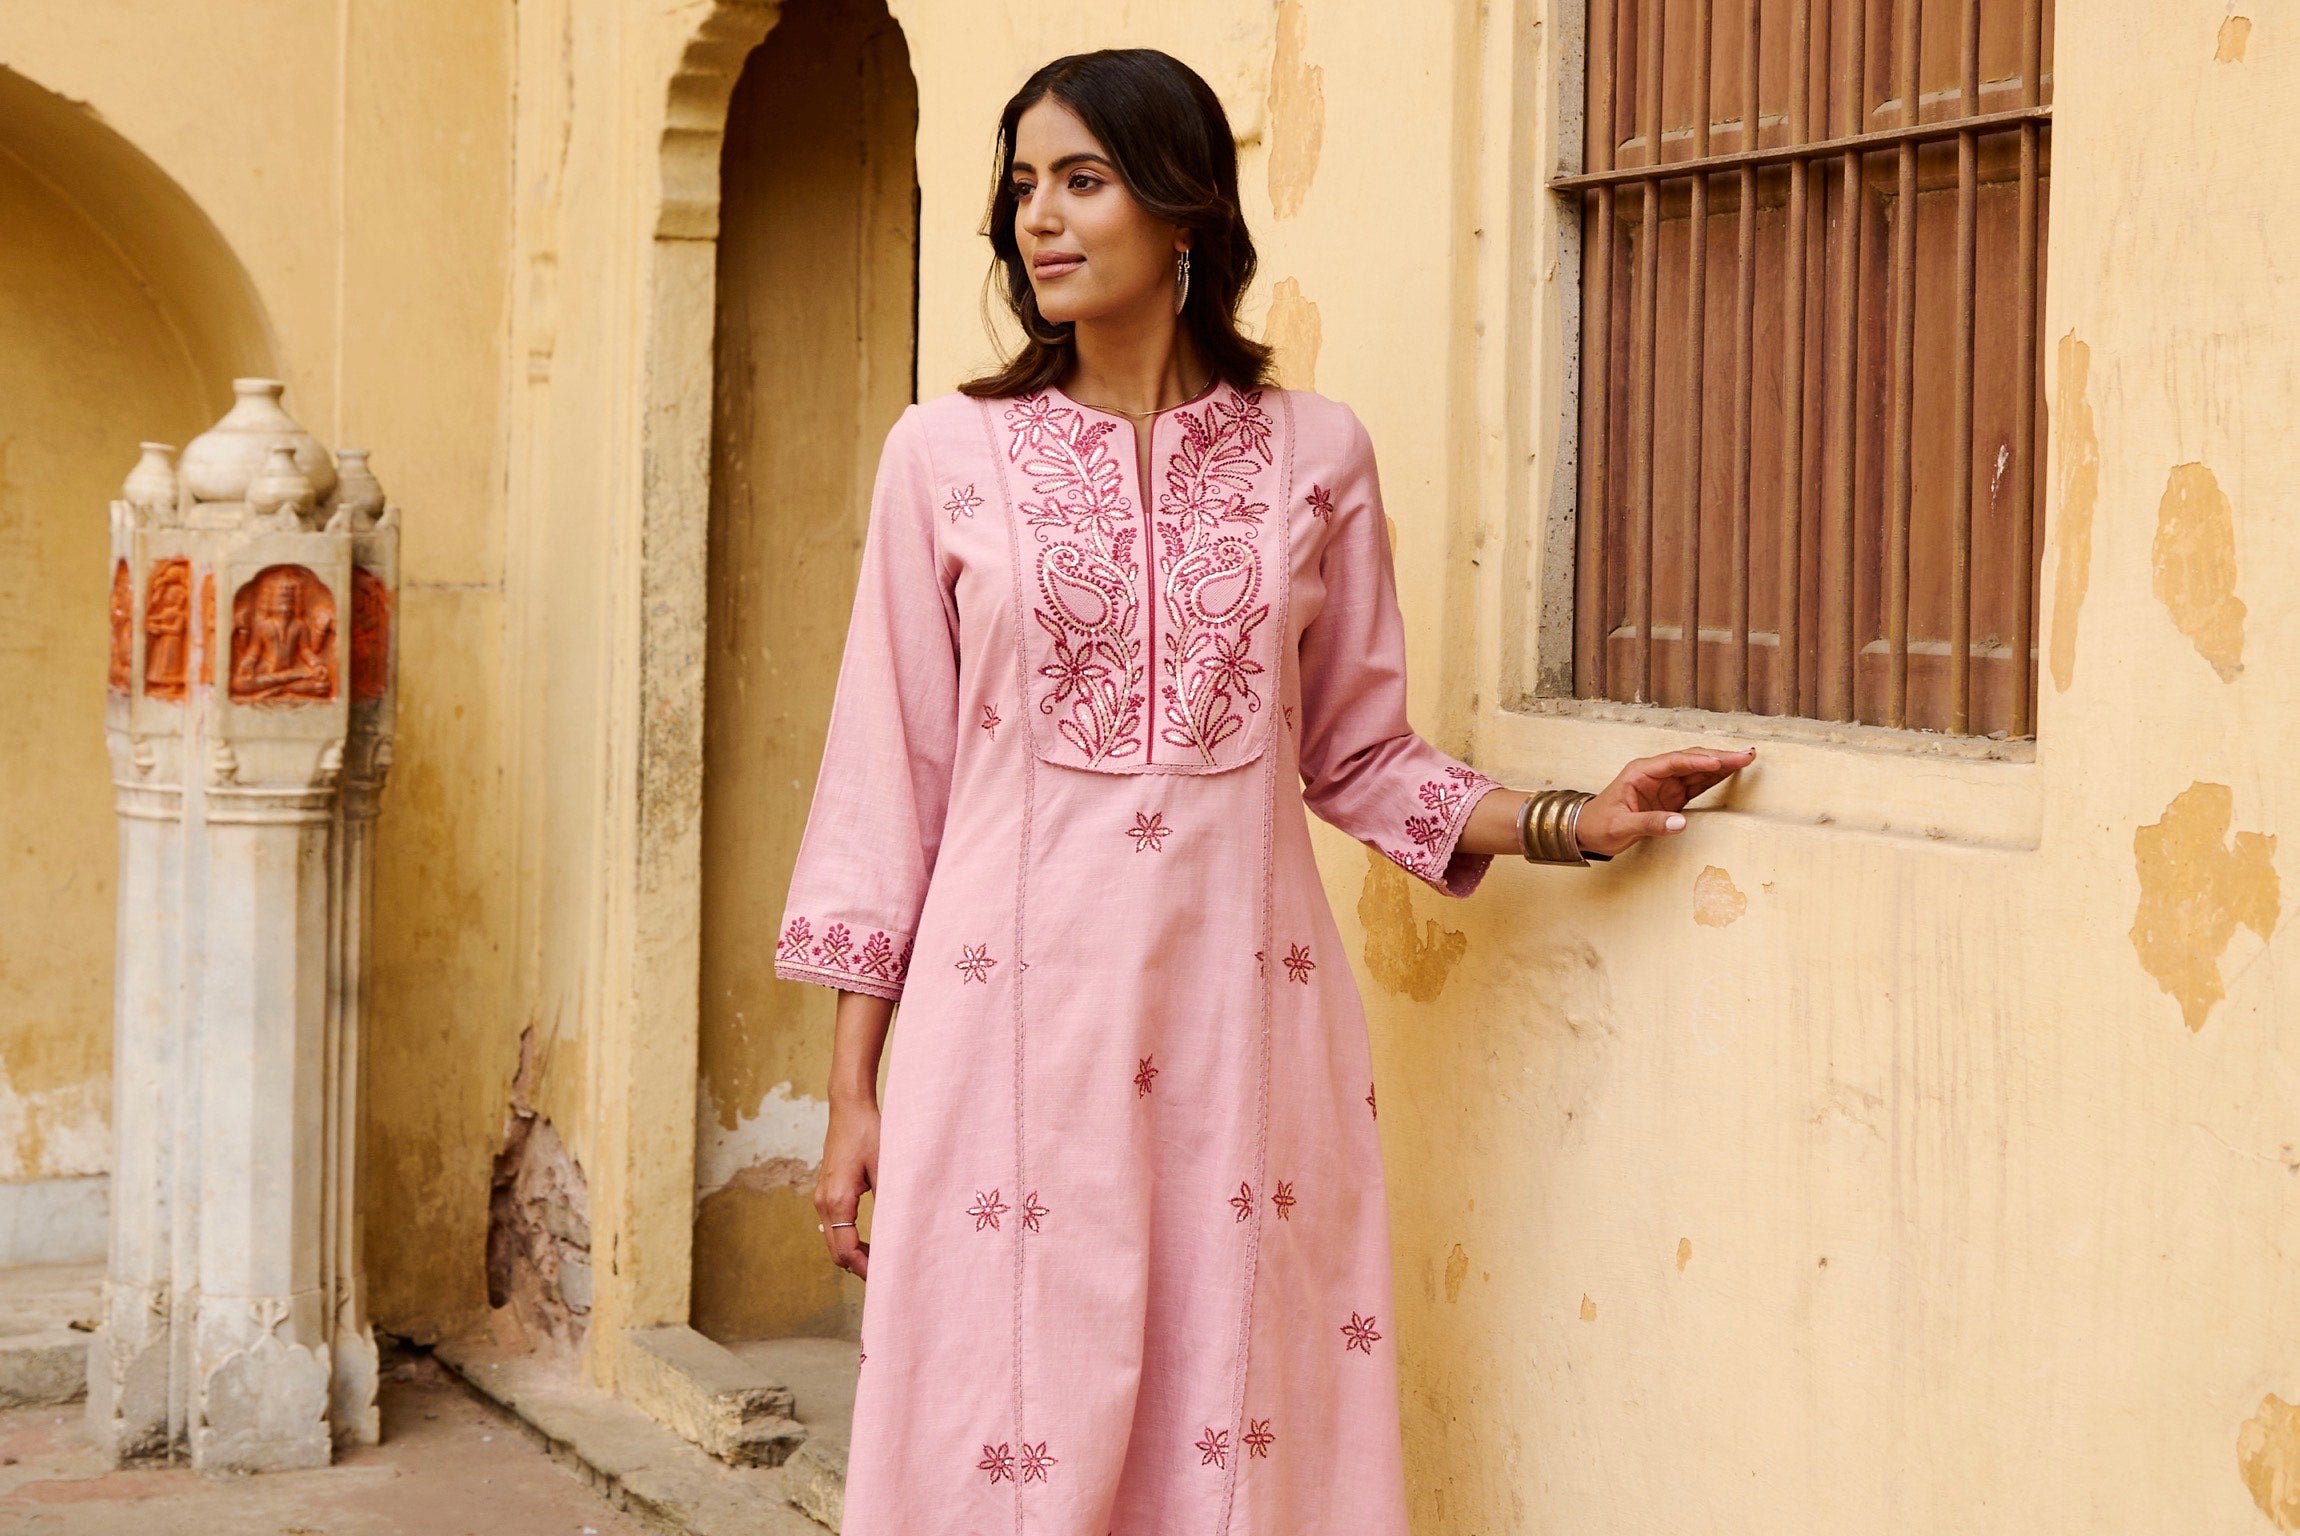 Creating a Capsule Wardrobe with Ethnic Clothing by Lakshita